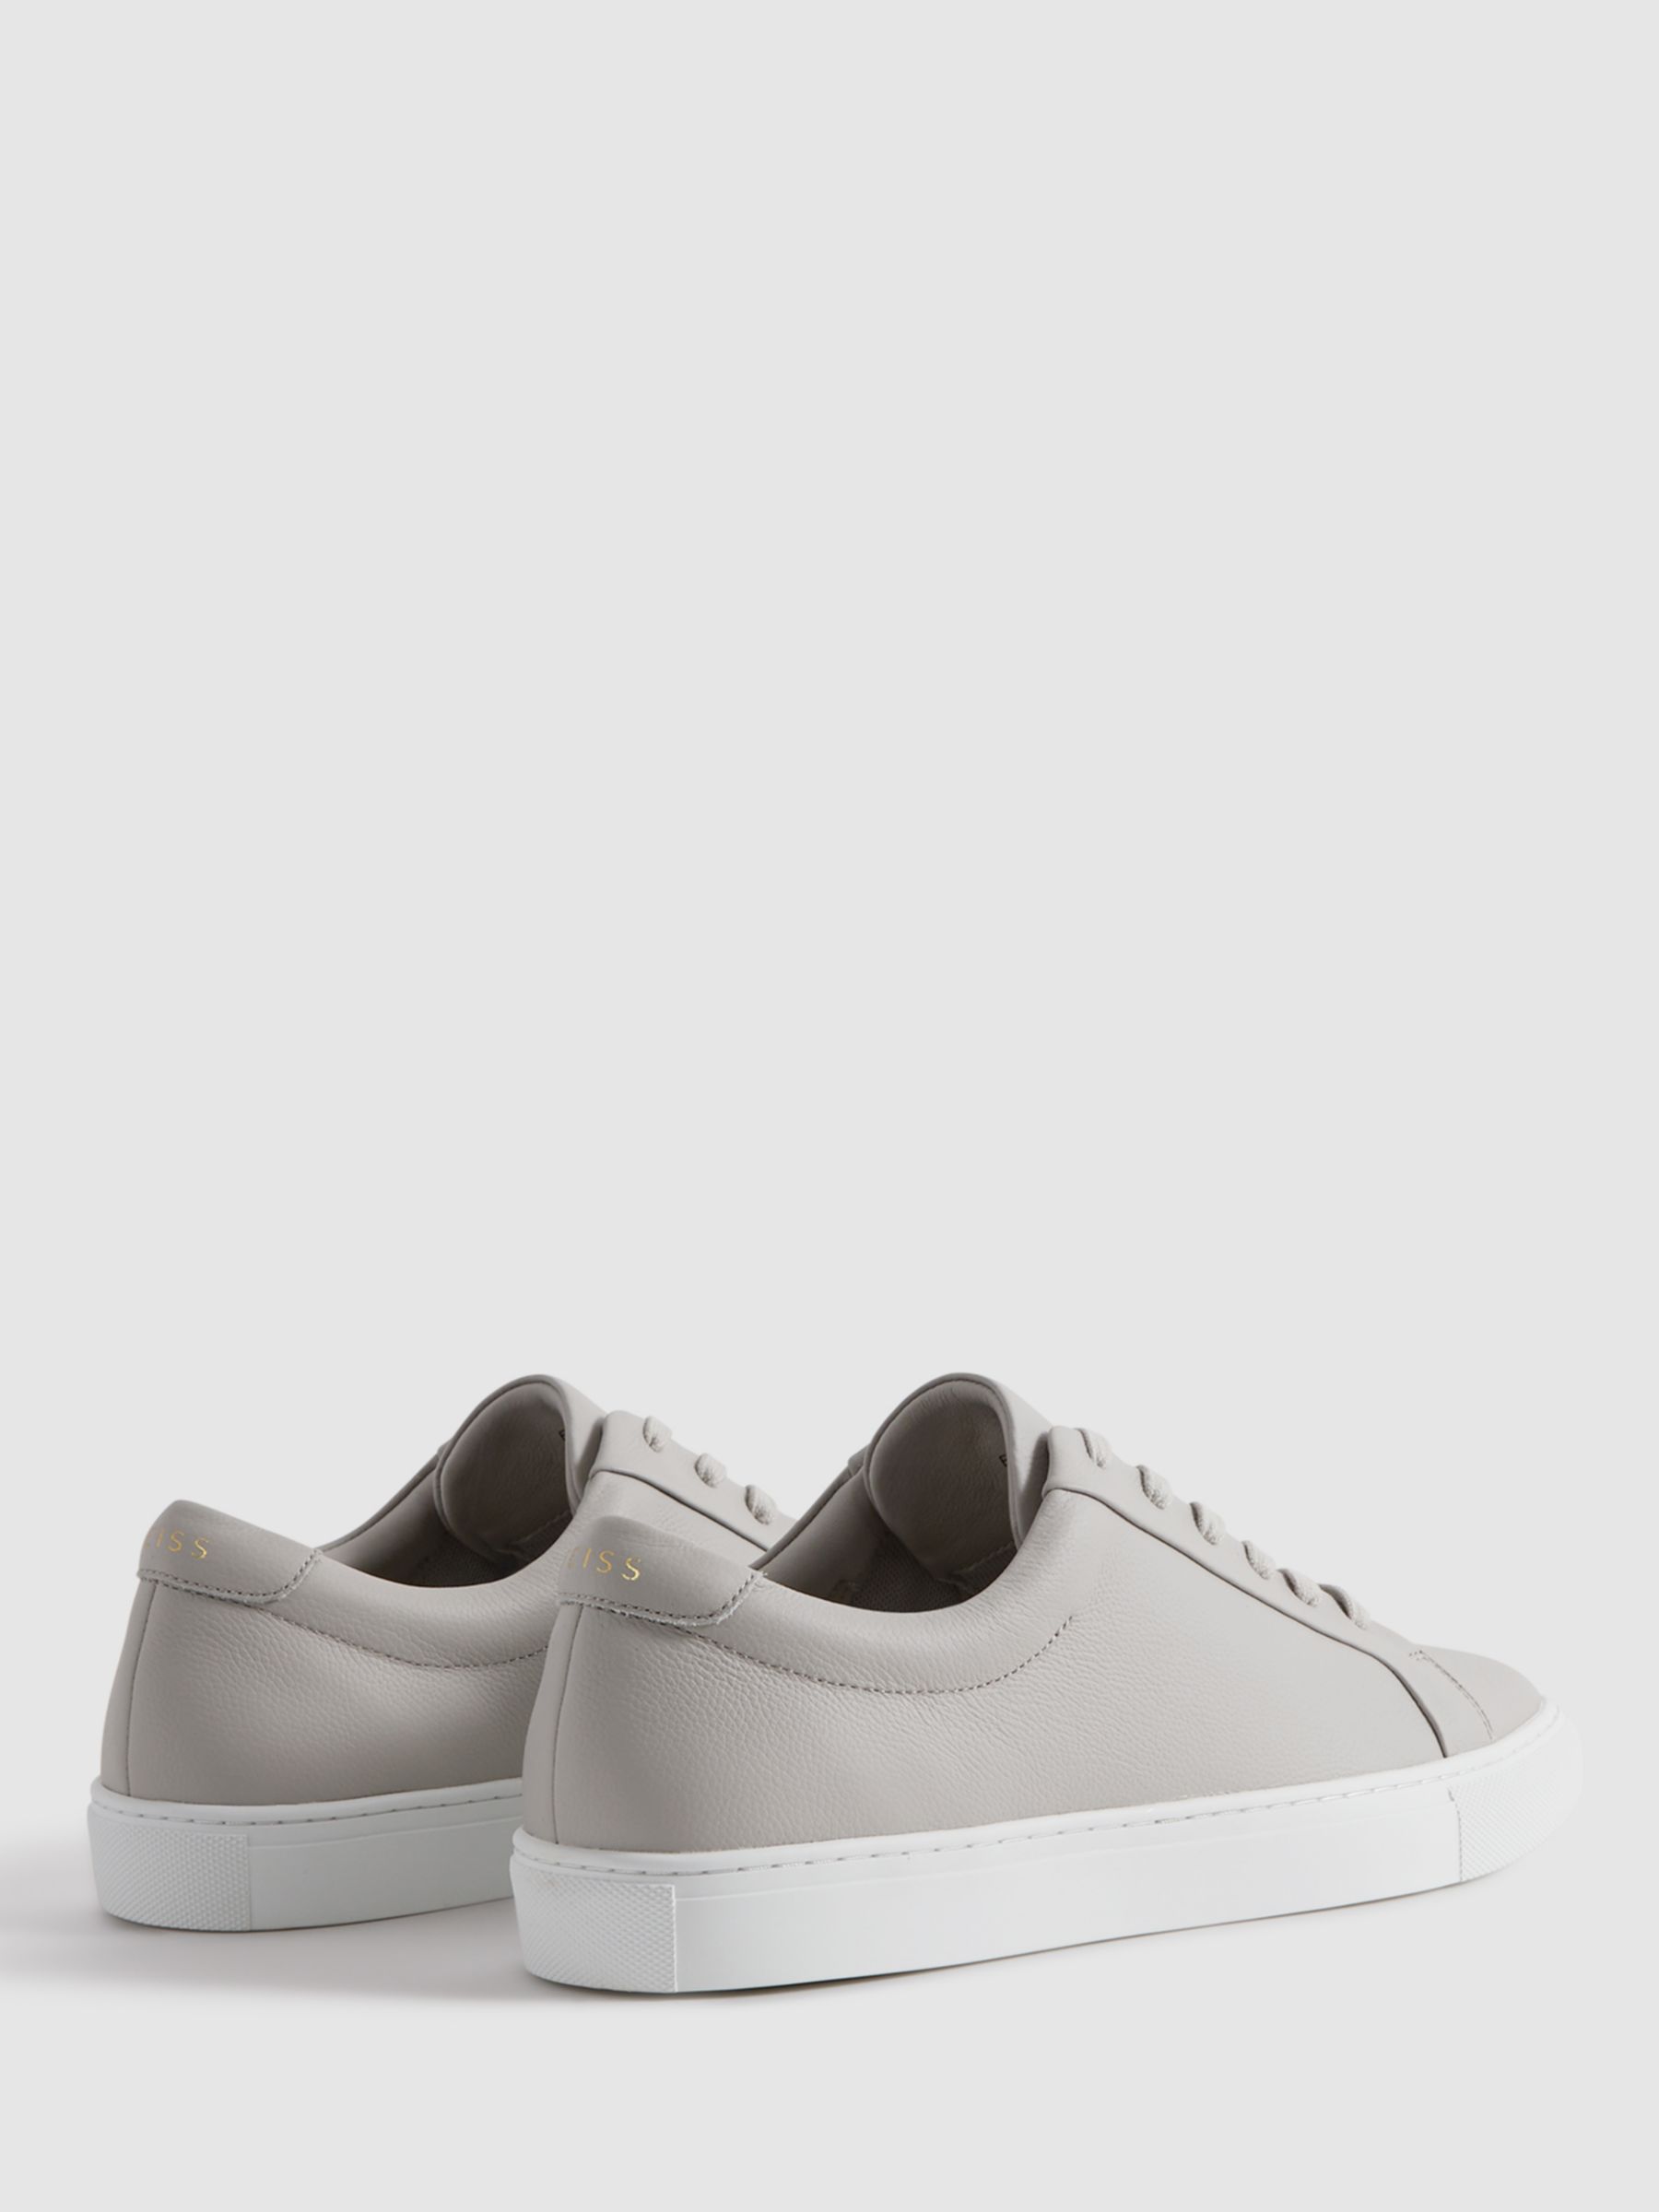 Buy Reiss Luca Tumbled Trainer Online at johnlewis.com